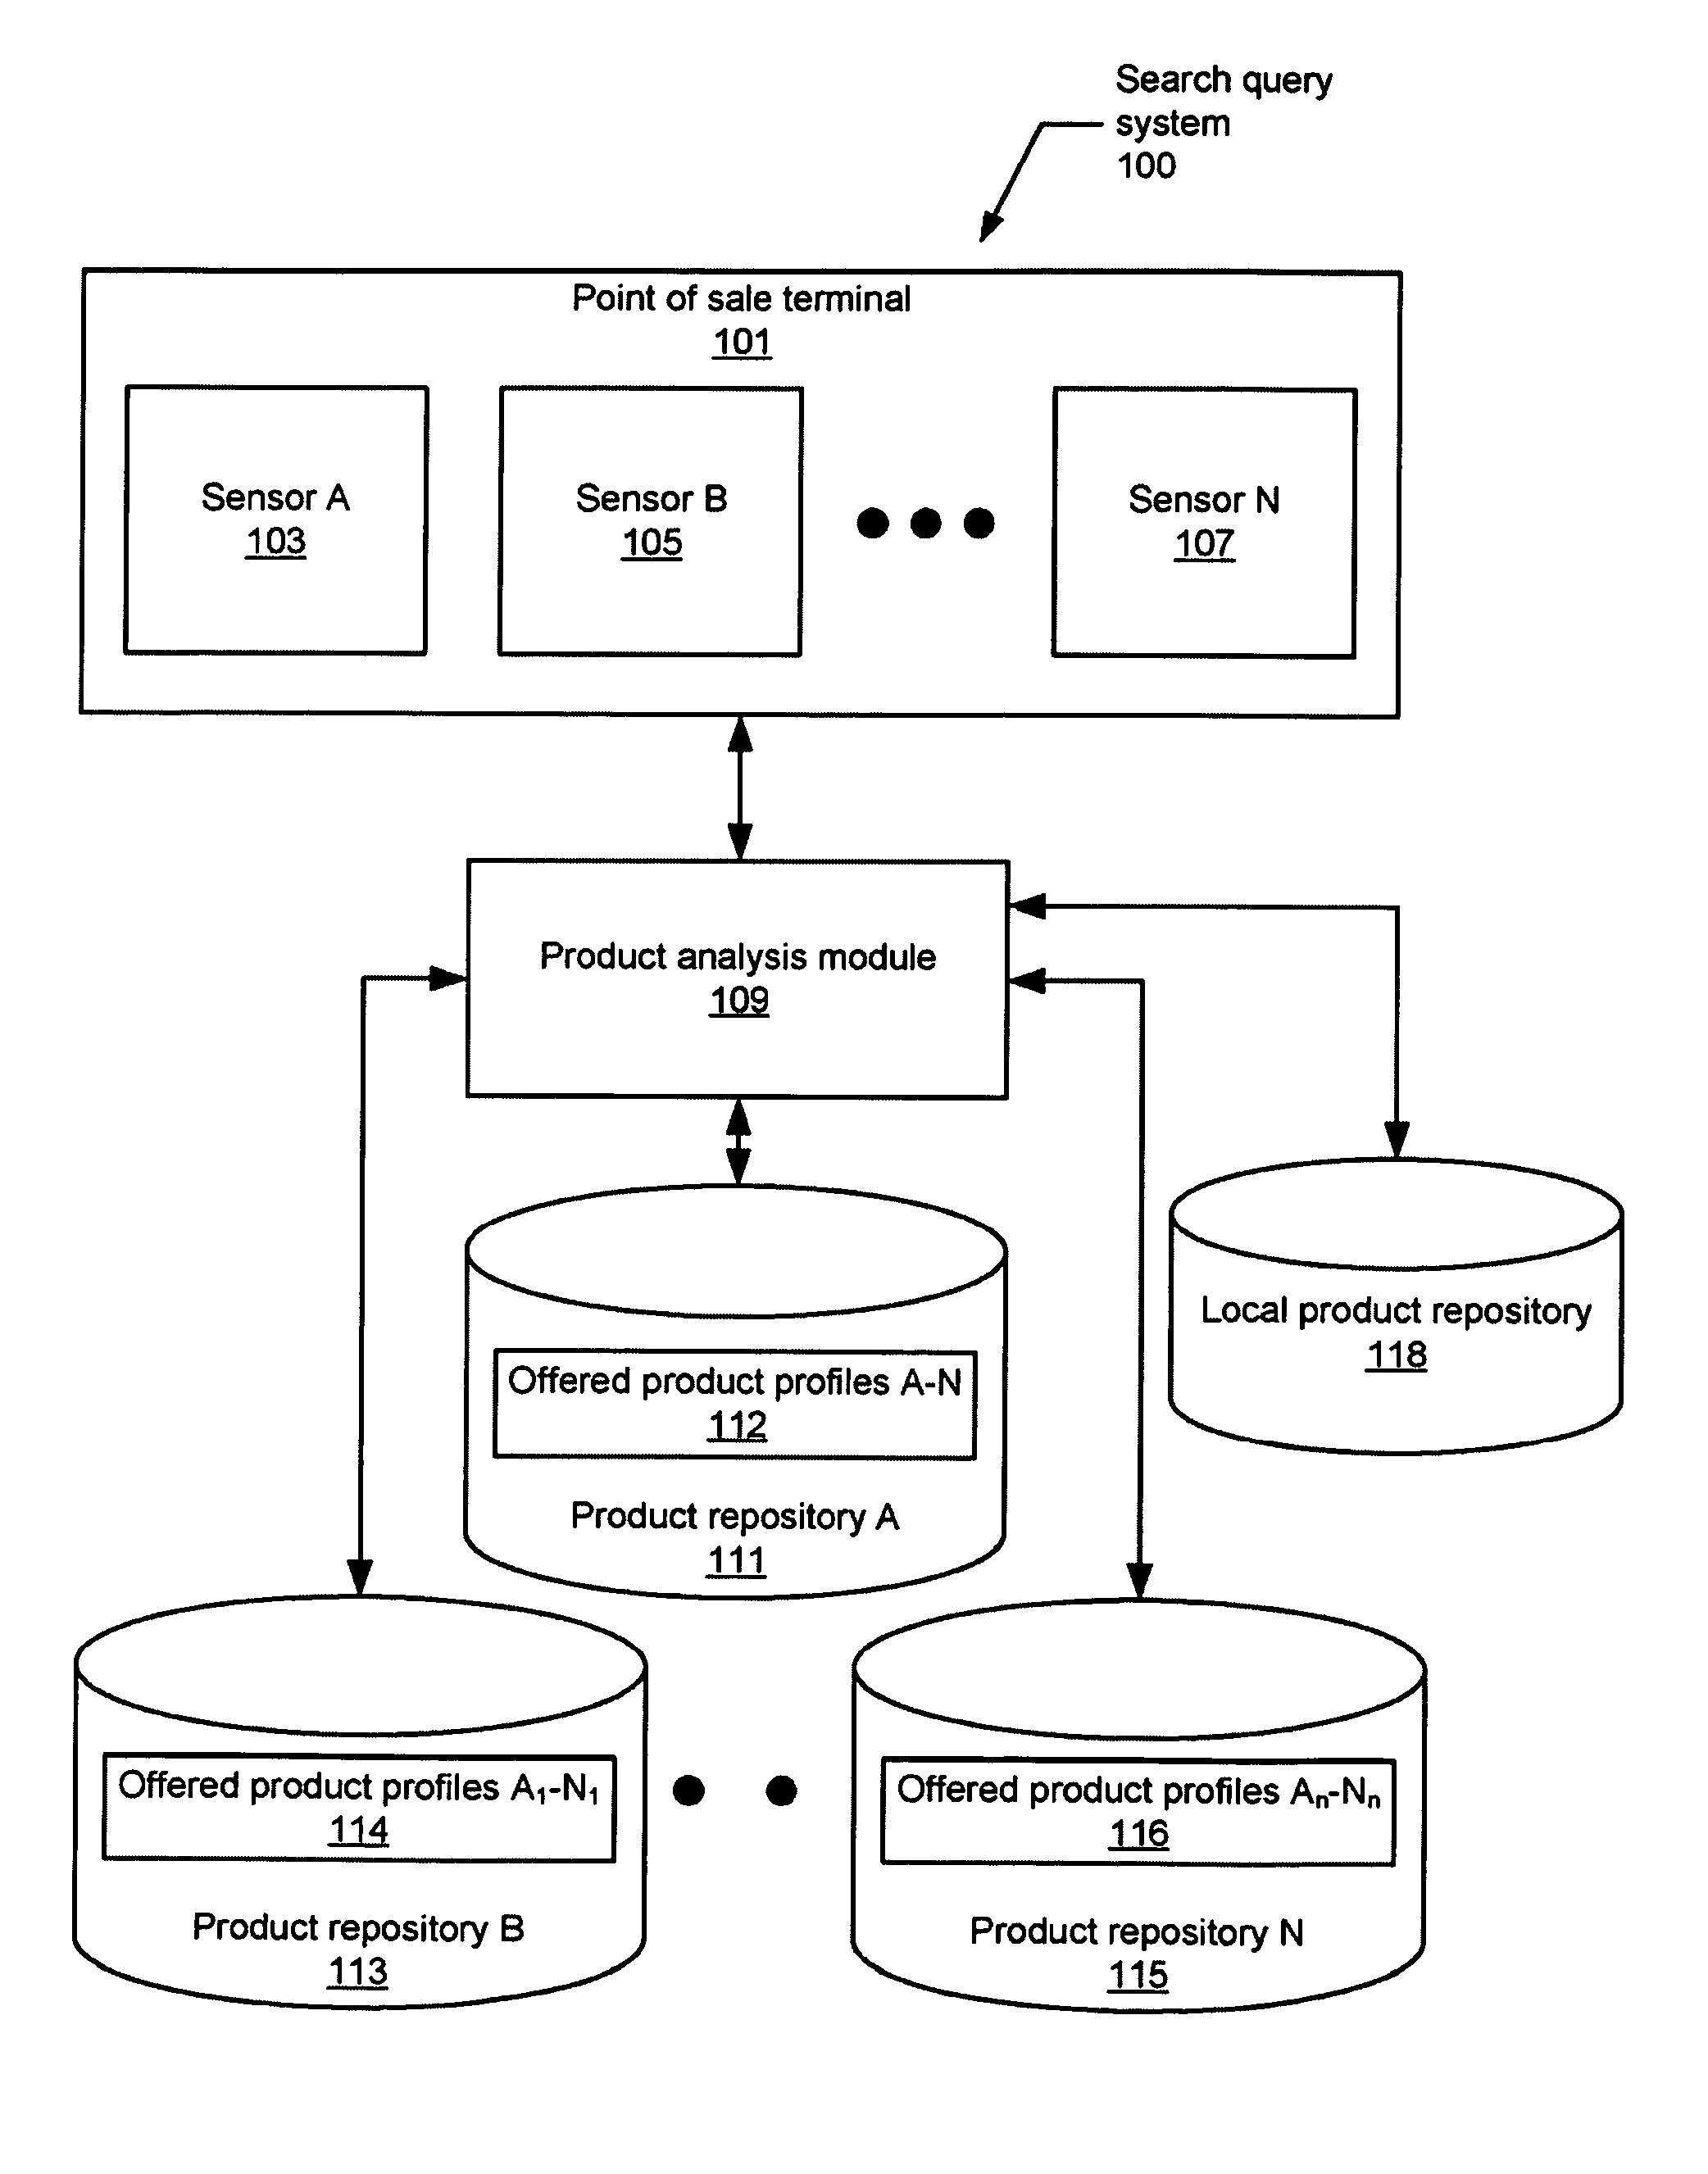 Method and system for matching via an image search query at a point of sale